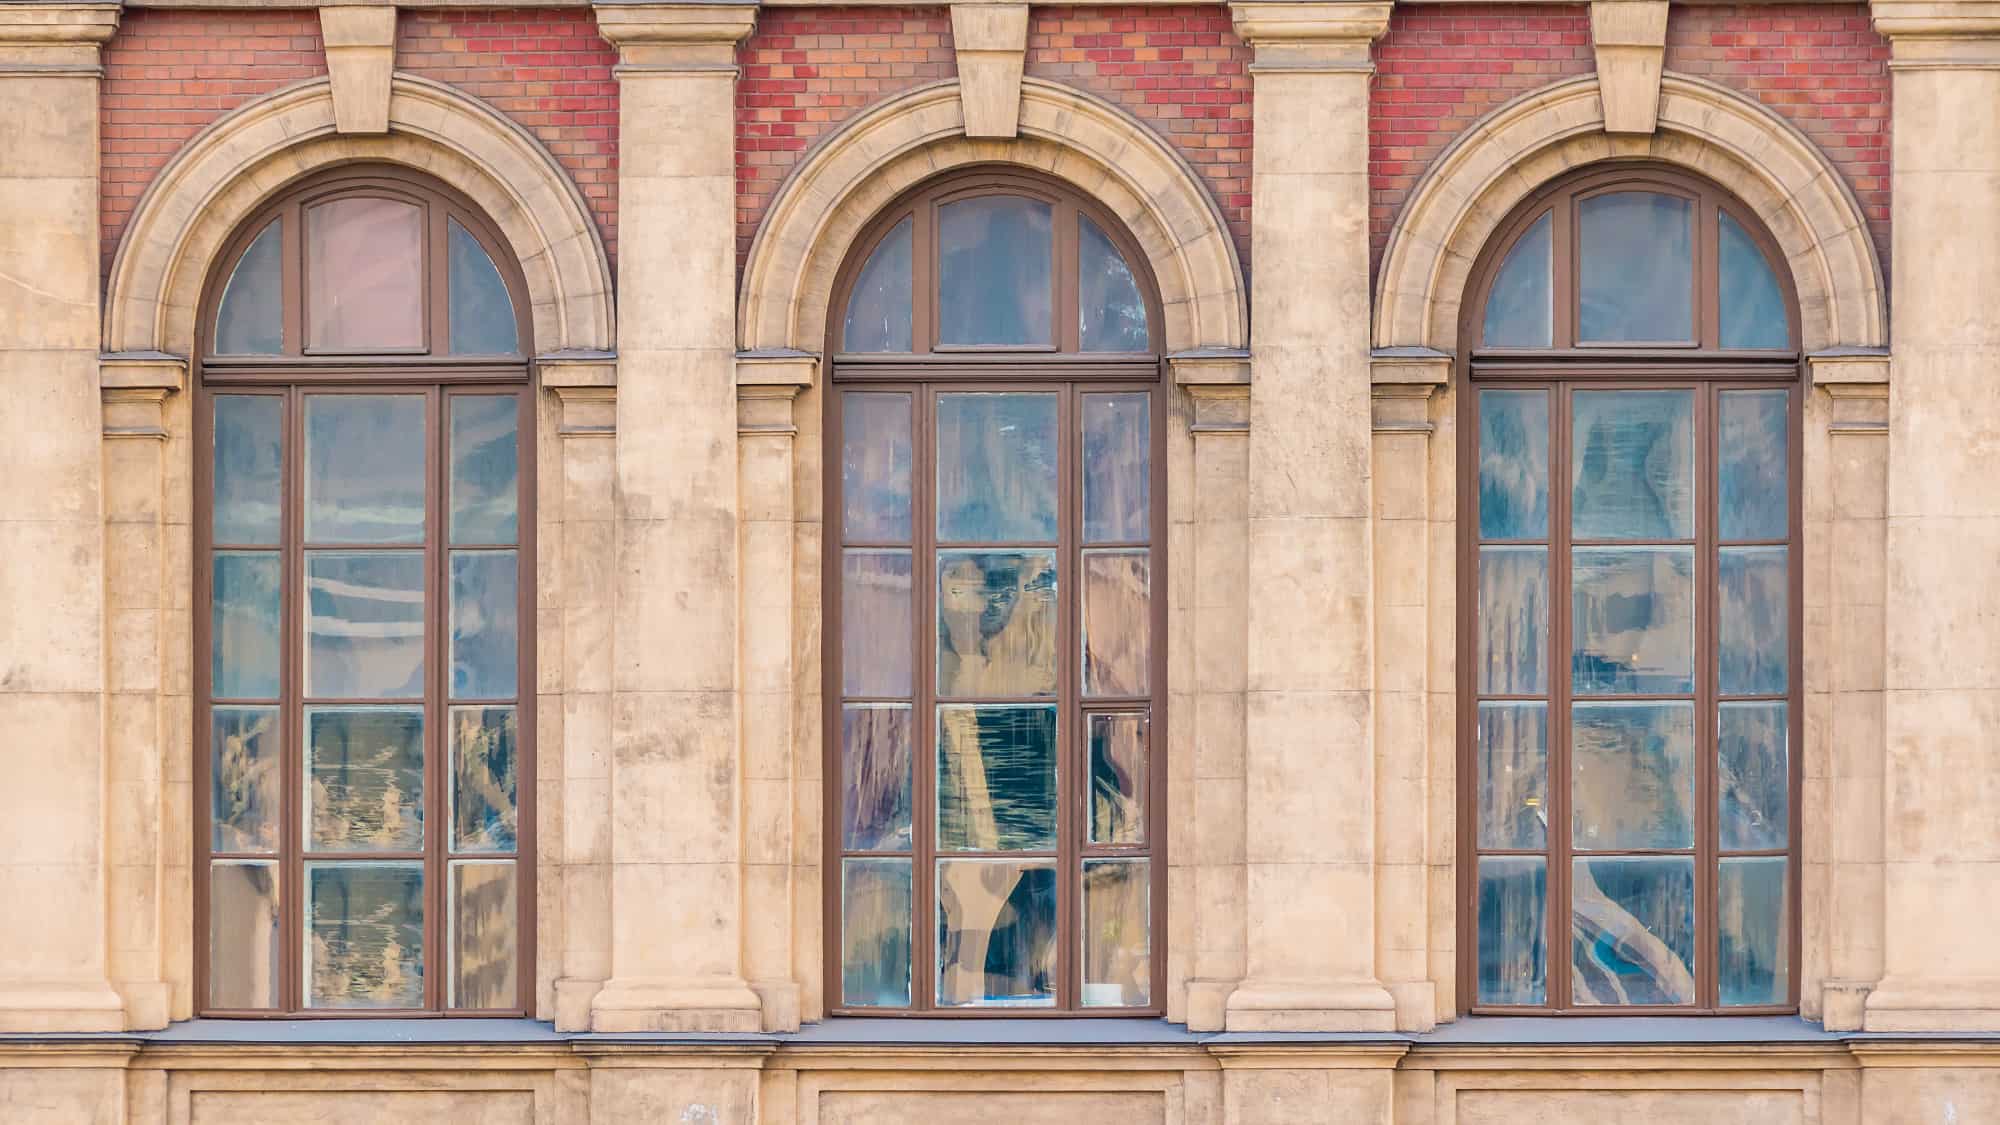 Why Window Restoration Is Best for Historic Buildings